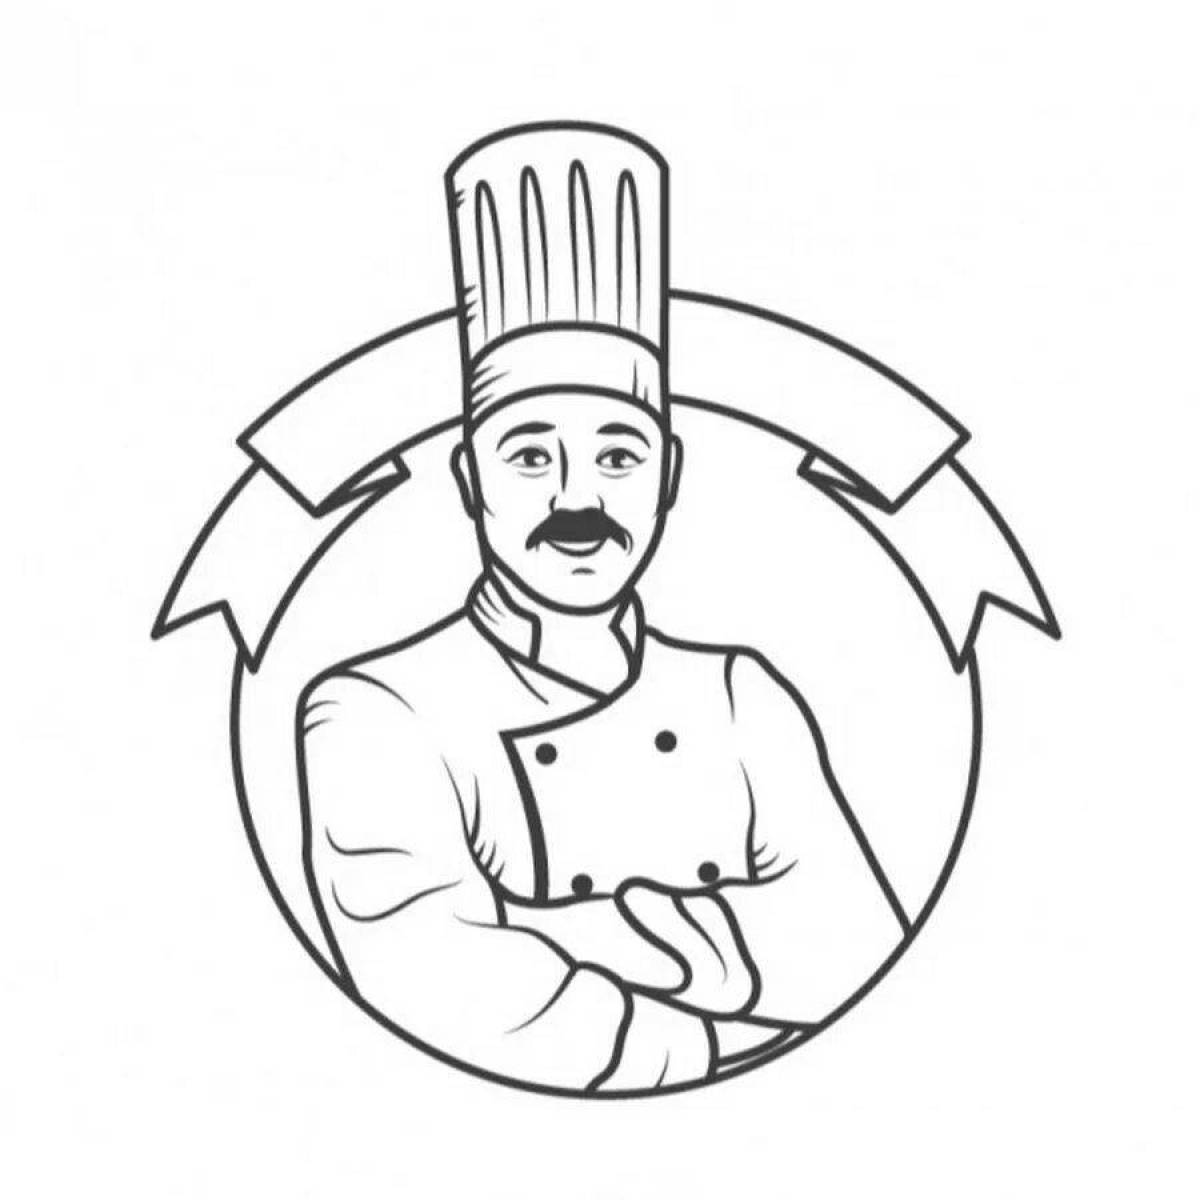 Color-frenzy pastry chef profession coloring page